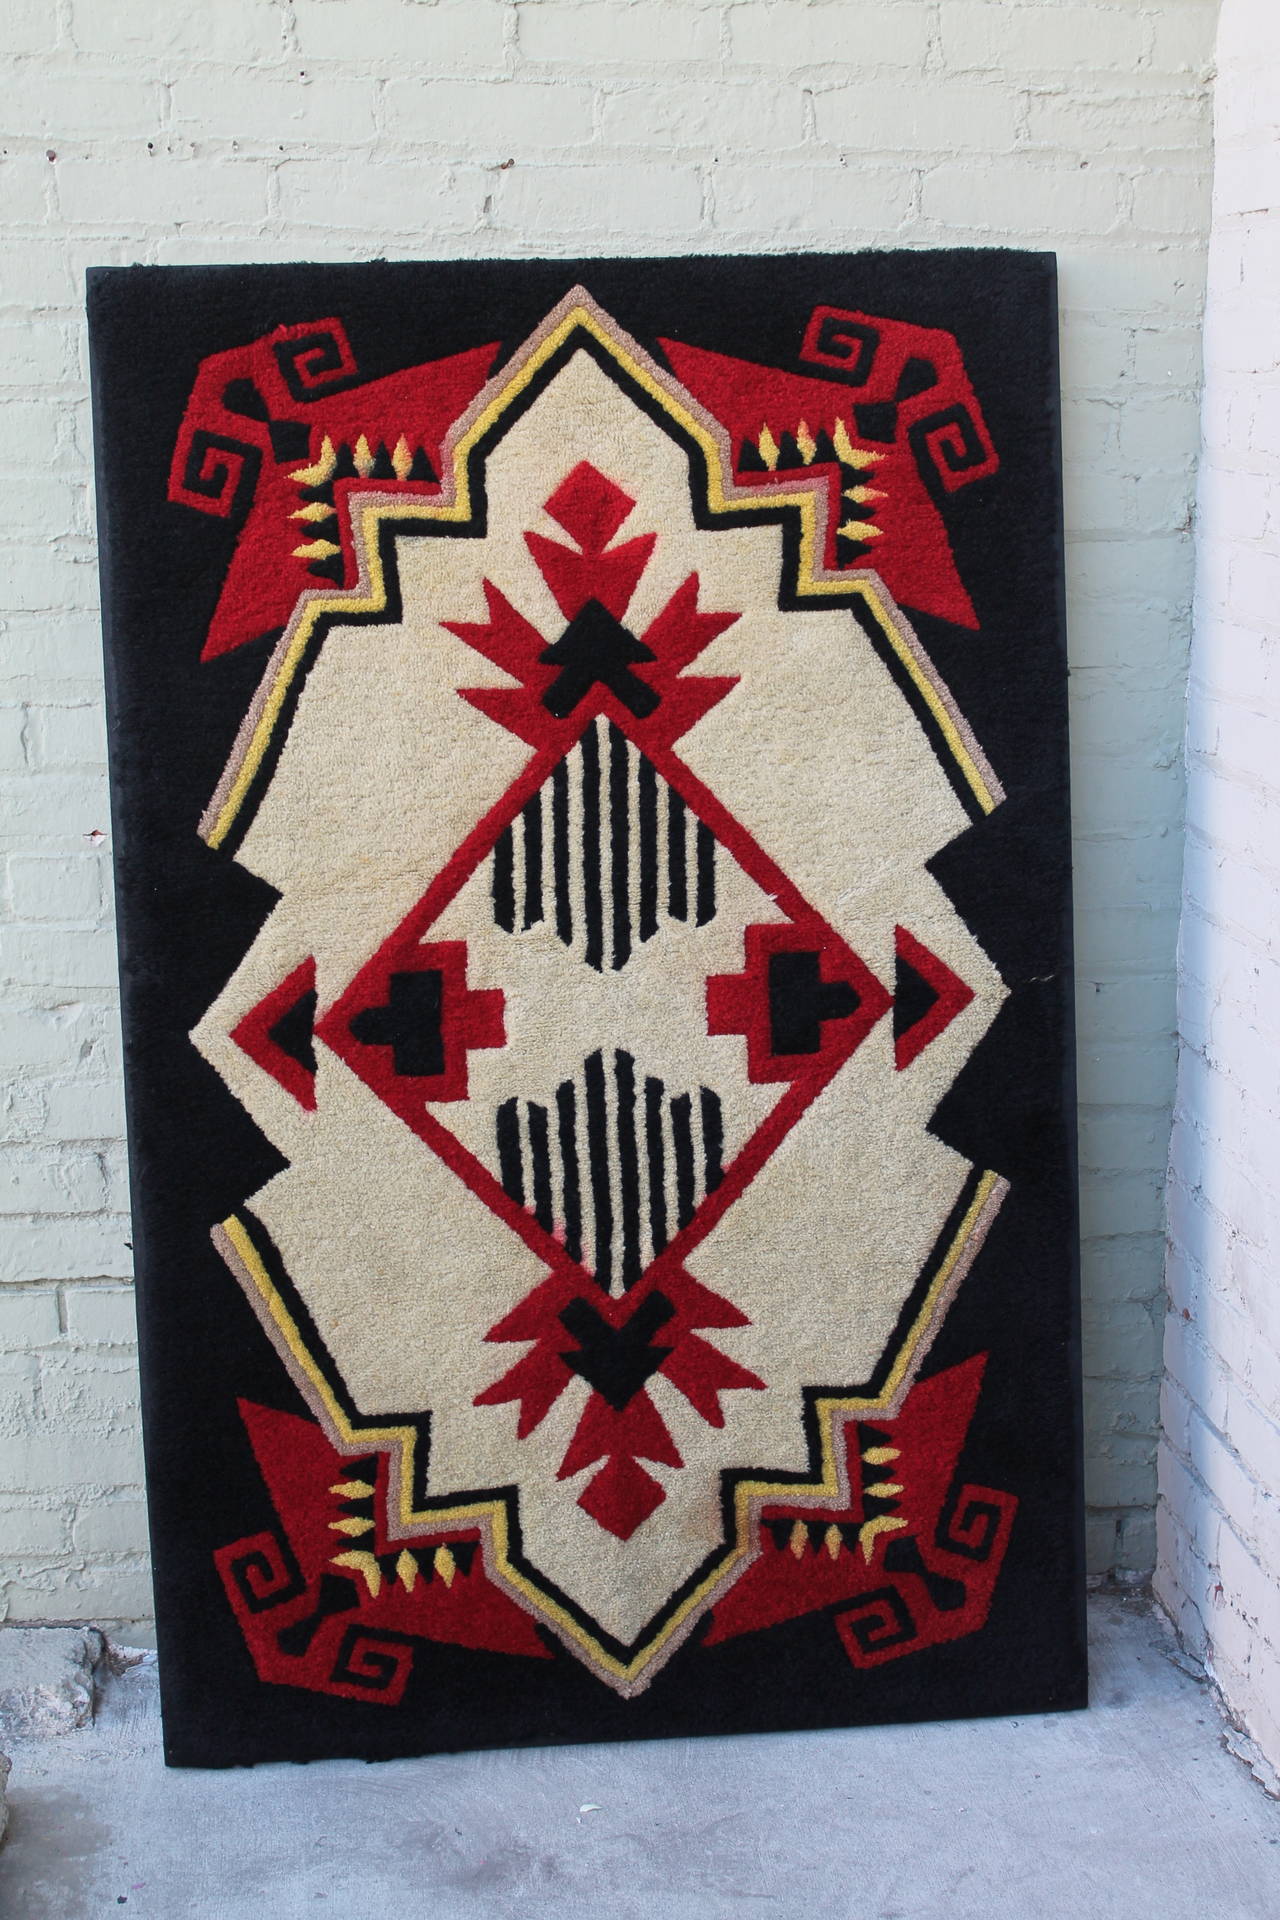 1930s mounted geometric hand hooked rug. Berlin work, embroidery style. Professionally sewn on linen and mounted on stretcher frame. Geometric with a little Native American appeal or look.